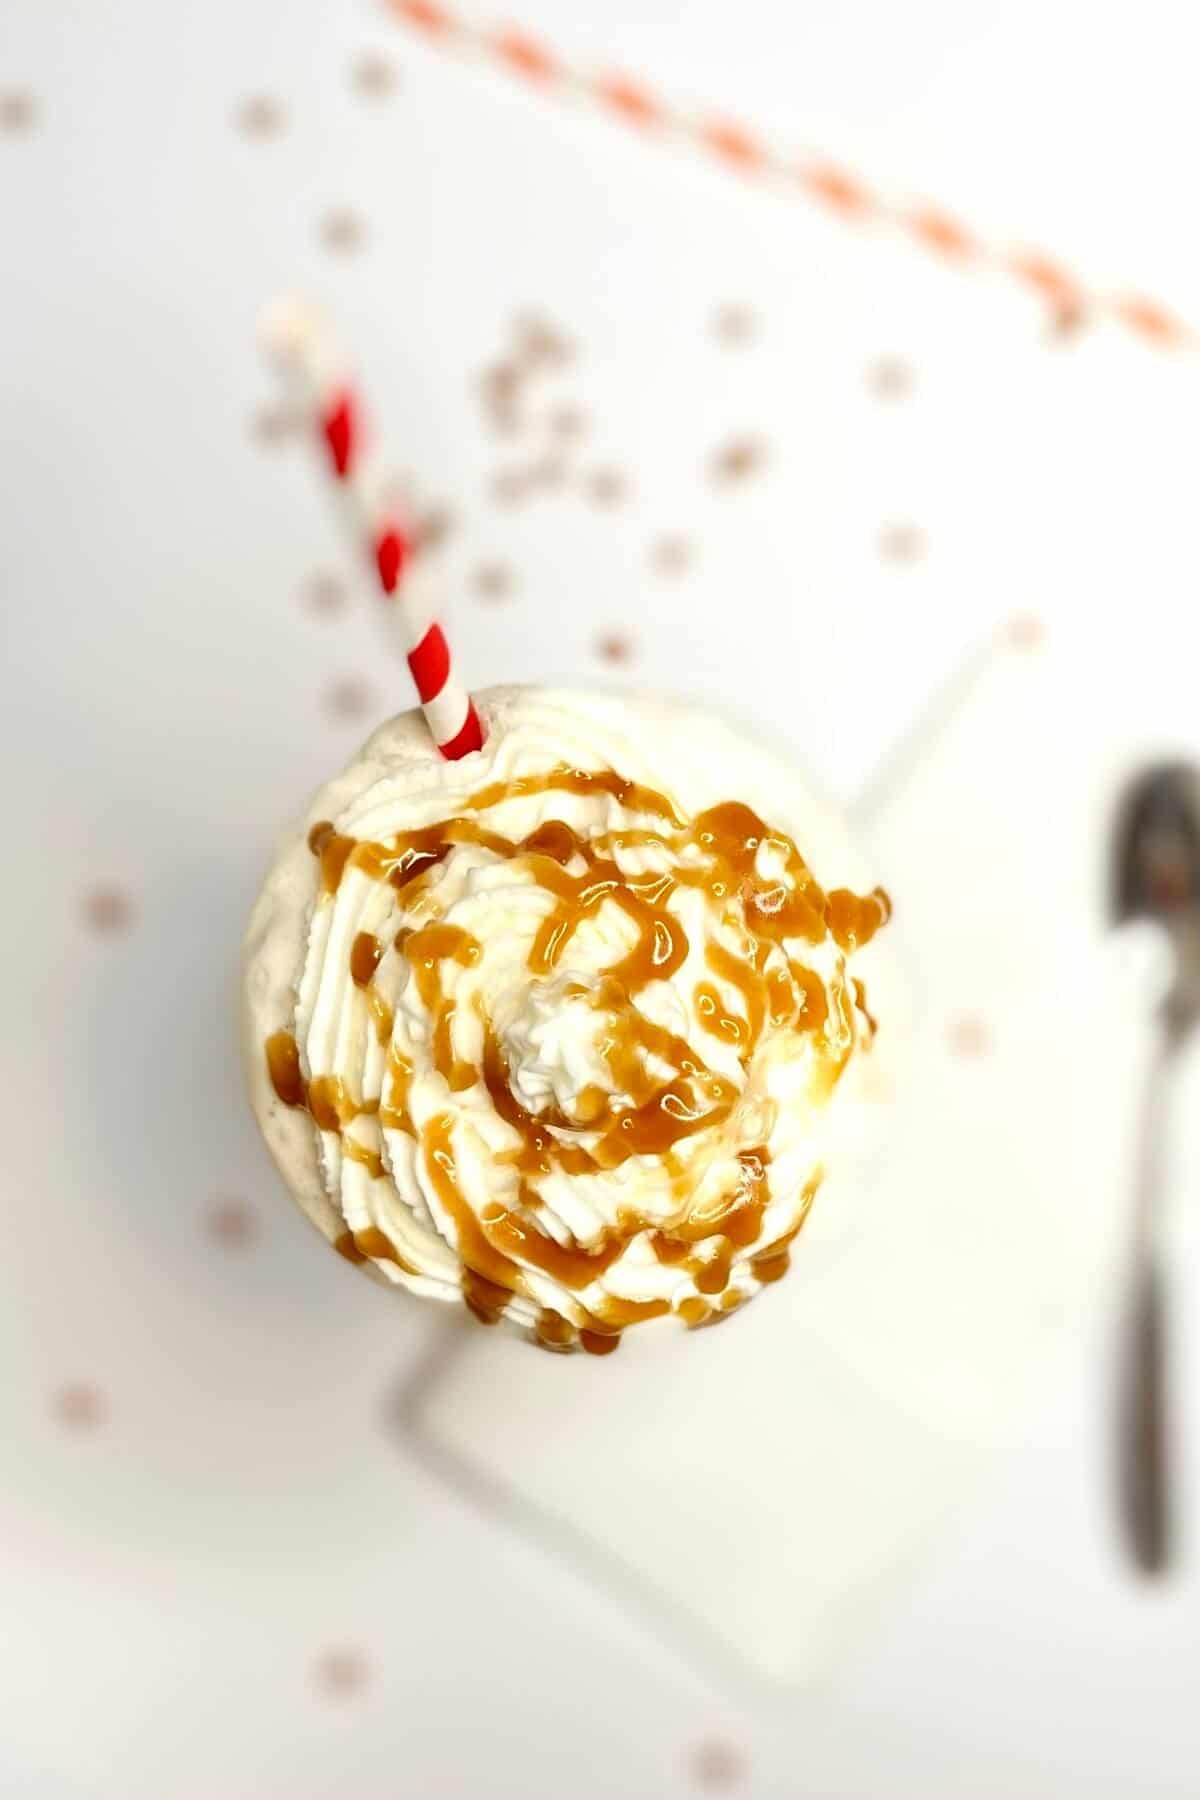 Top of milkshake, with caramel sauce drizzled on top and a red and white striped straw.